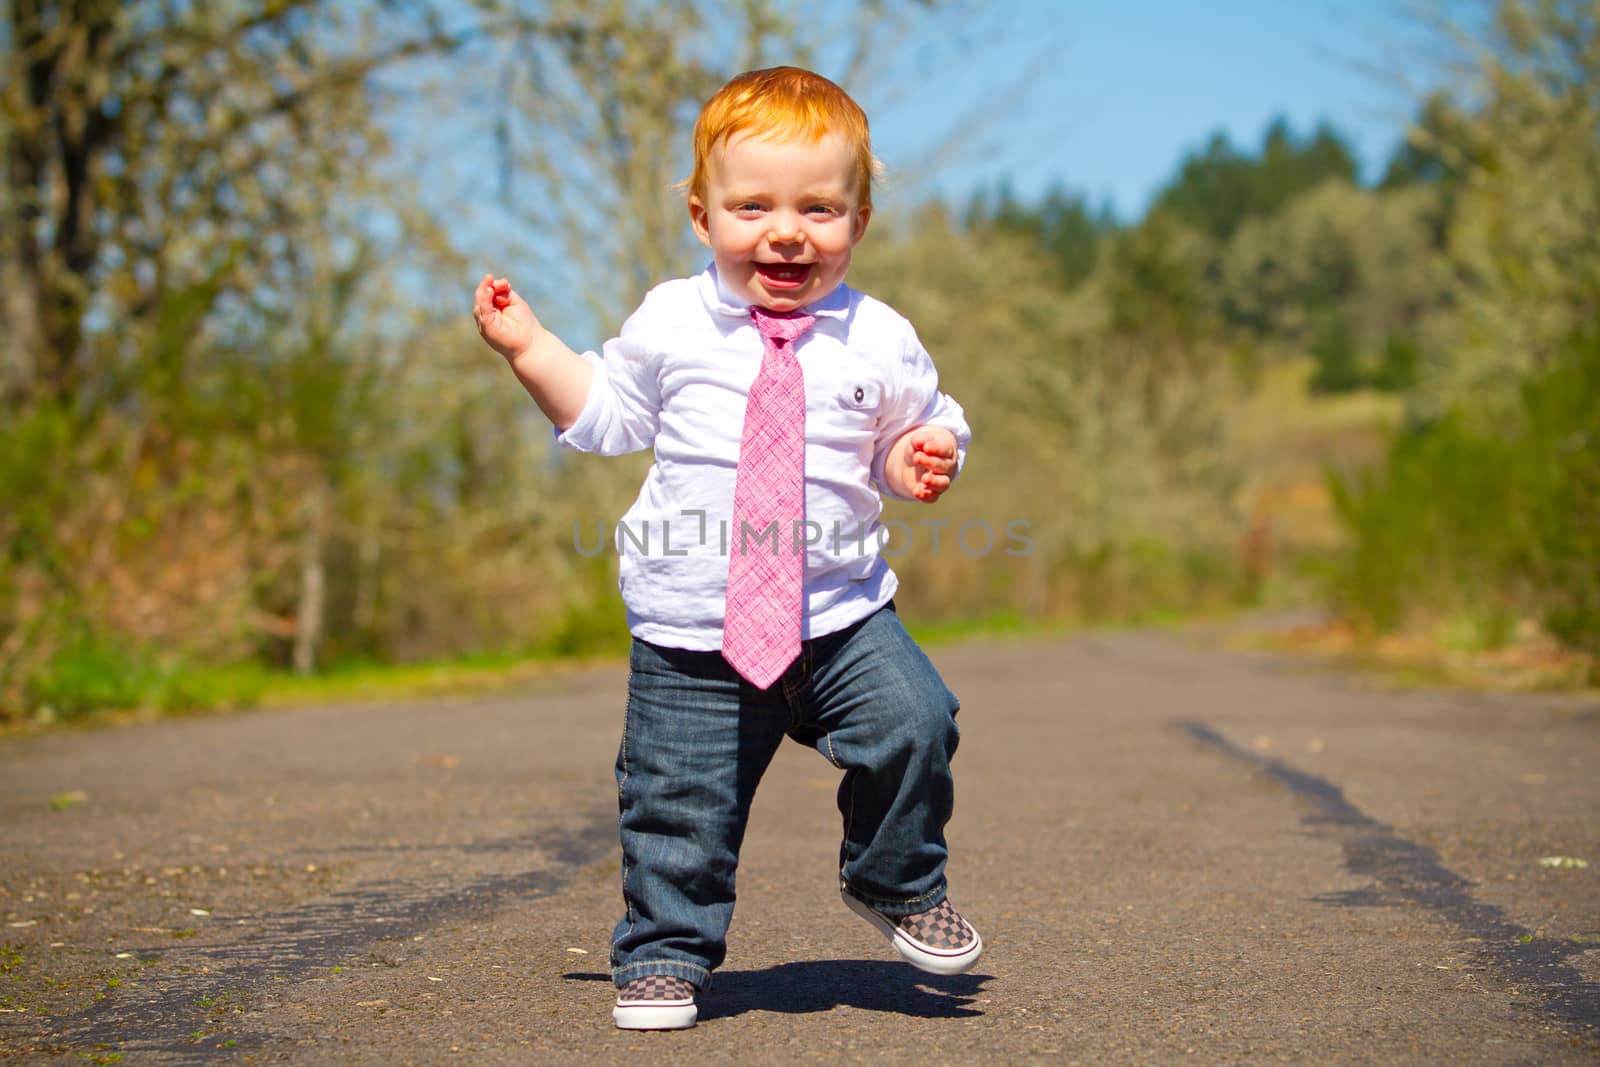 A one year old boy taking some of his first steps outdoors on a path with selective focus while wearing a nice shirt and a necktie.